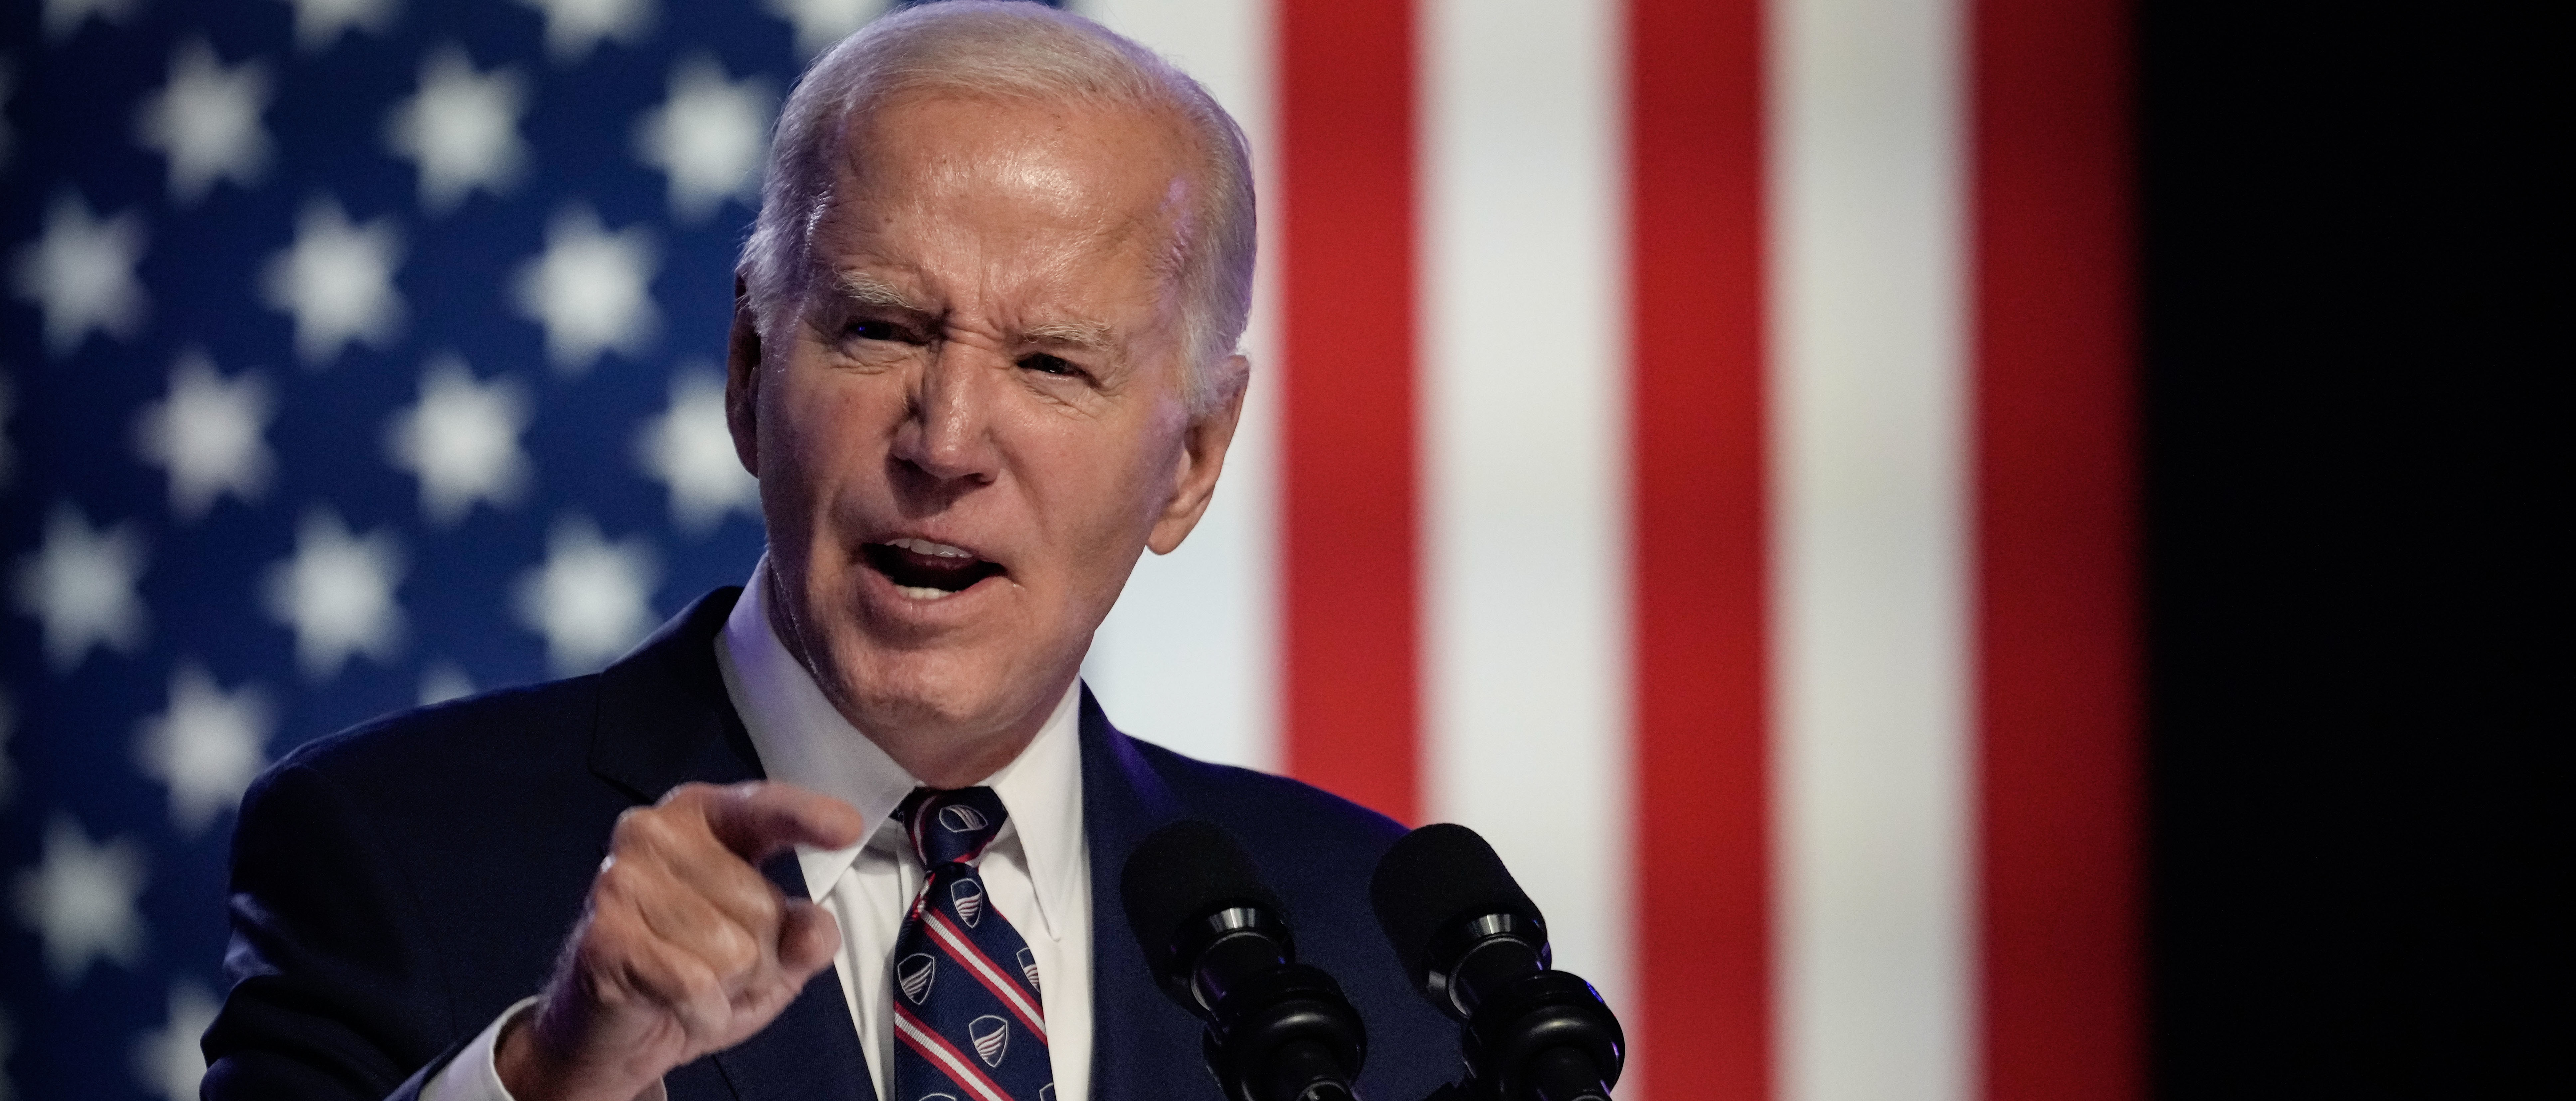 Former Dem Presidential Candidate Blasts Biden For Claiming To Defend Democracy While ‘Suppressing’ Party Primary